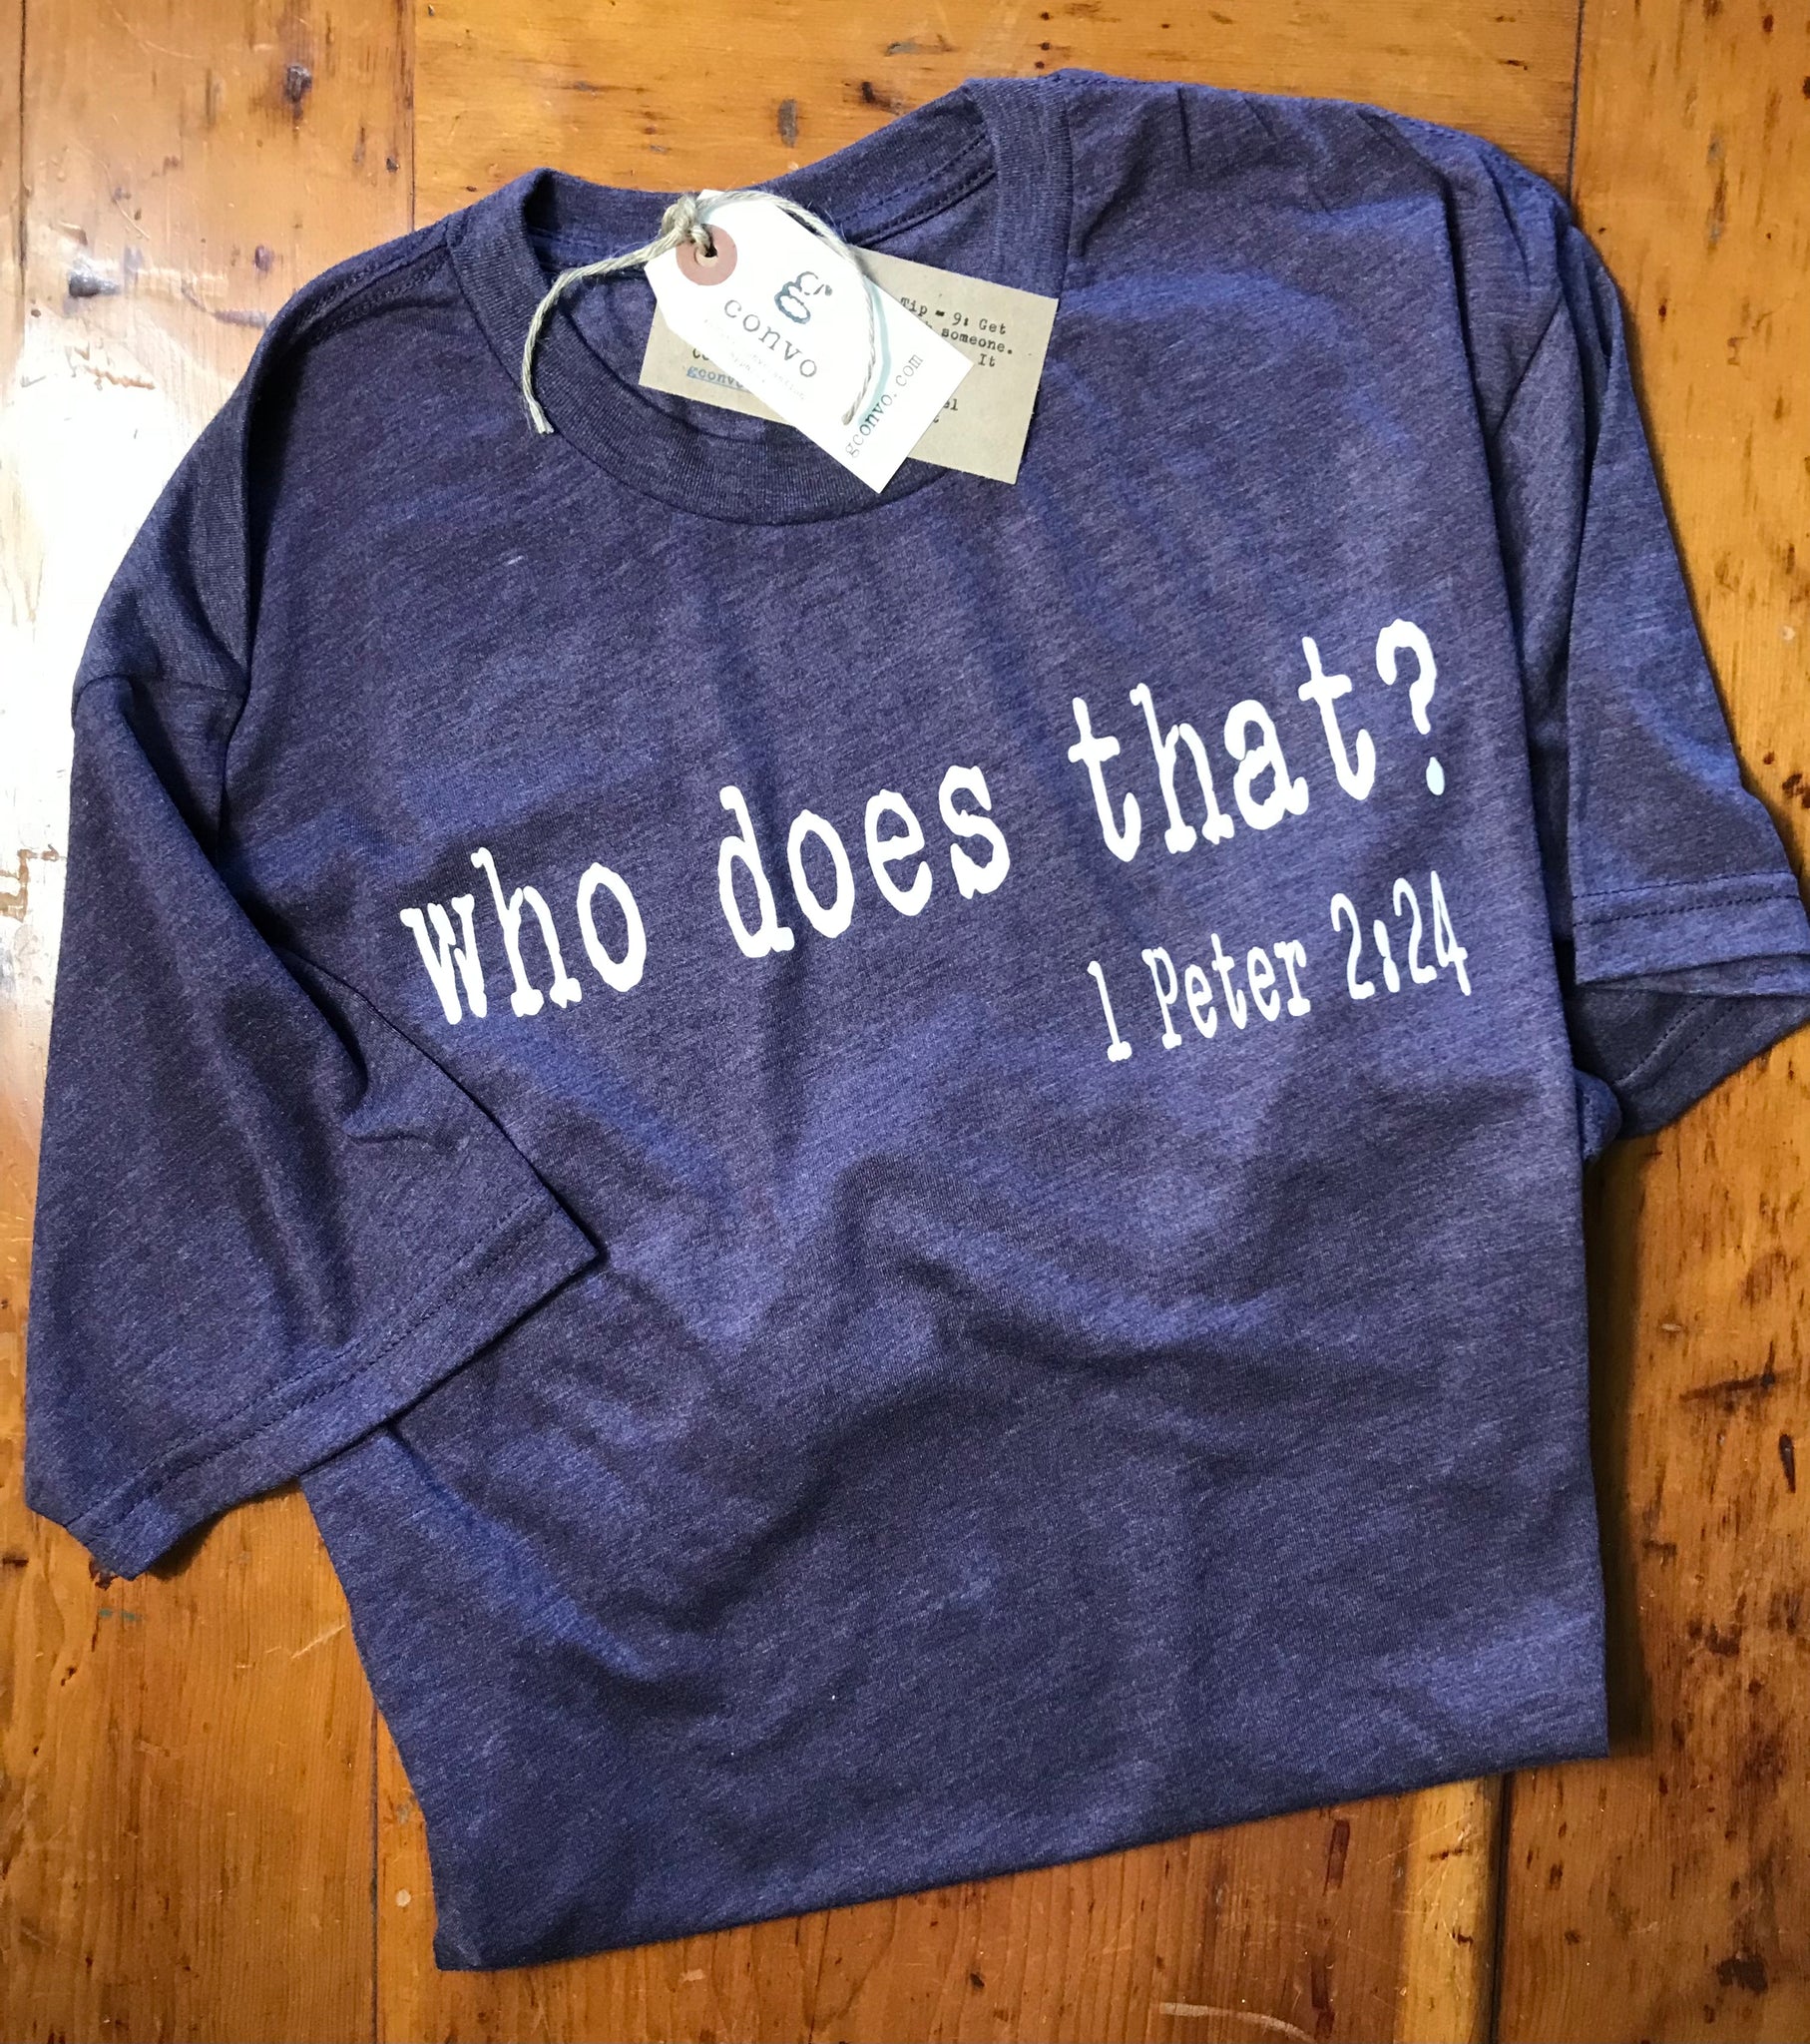 Who Does That? Short Sleeve Tee Shirt, Crew Neck, Heather Vintage Purple